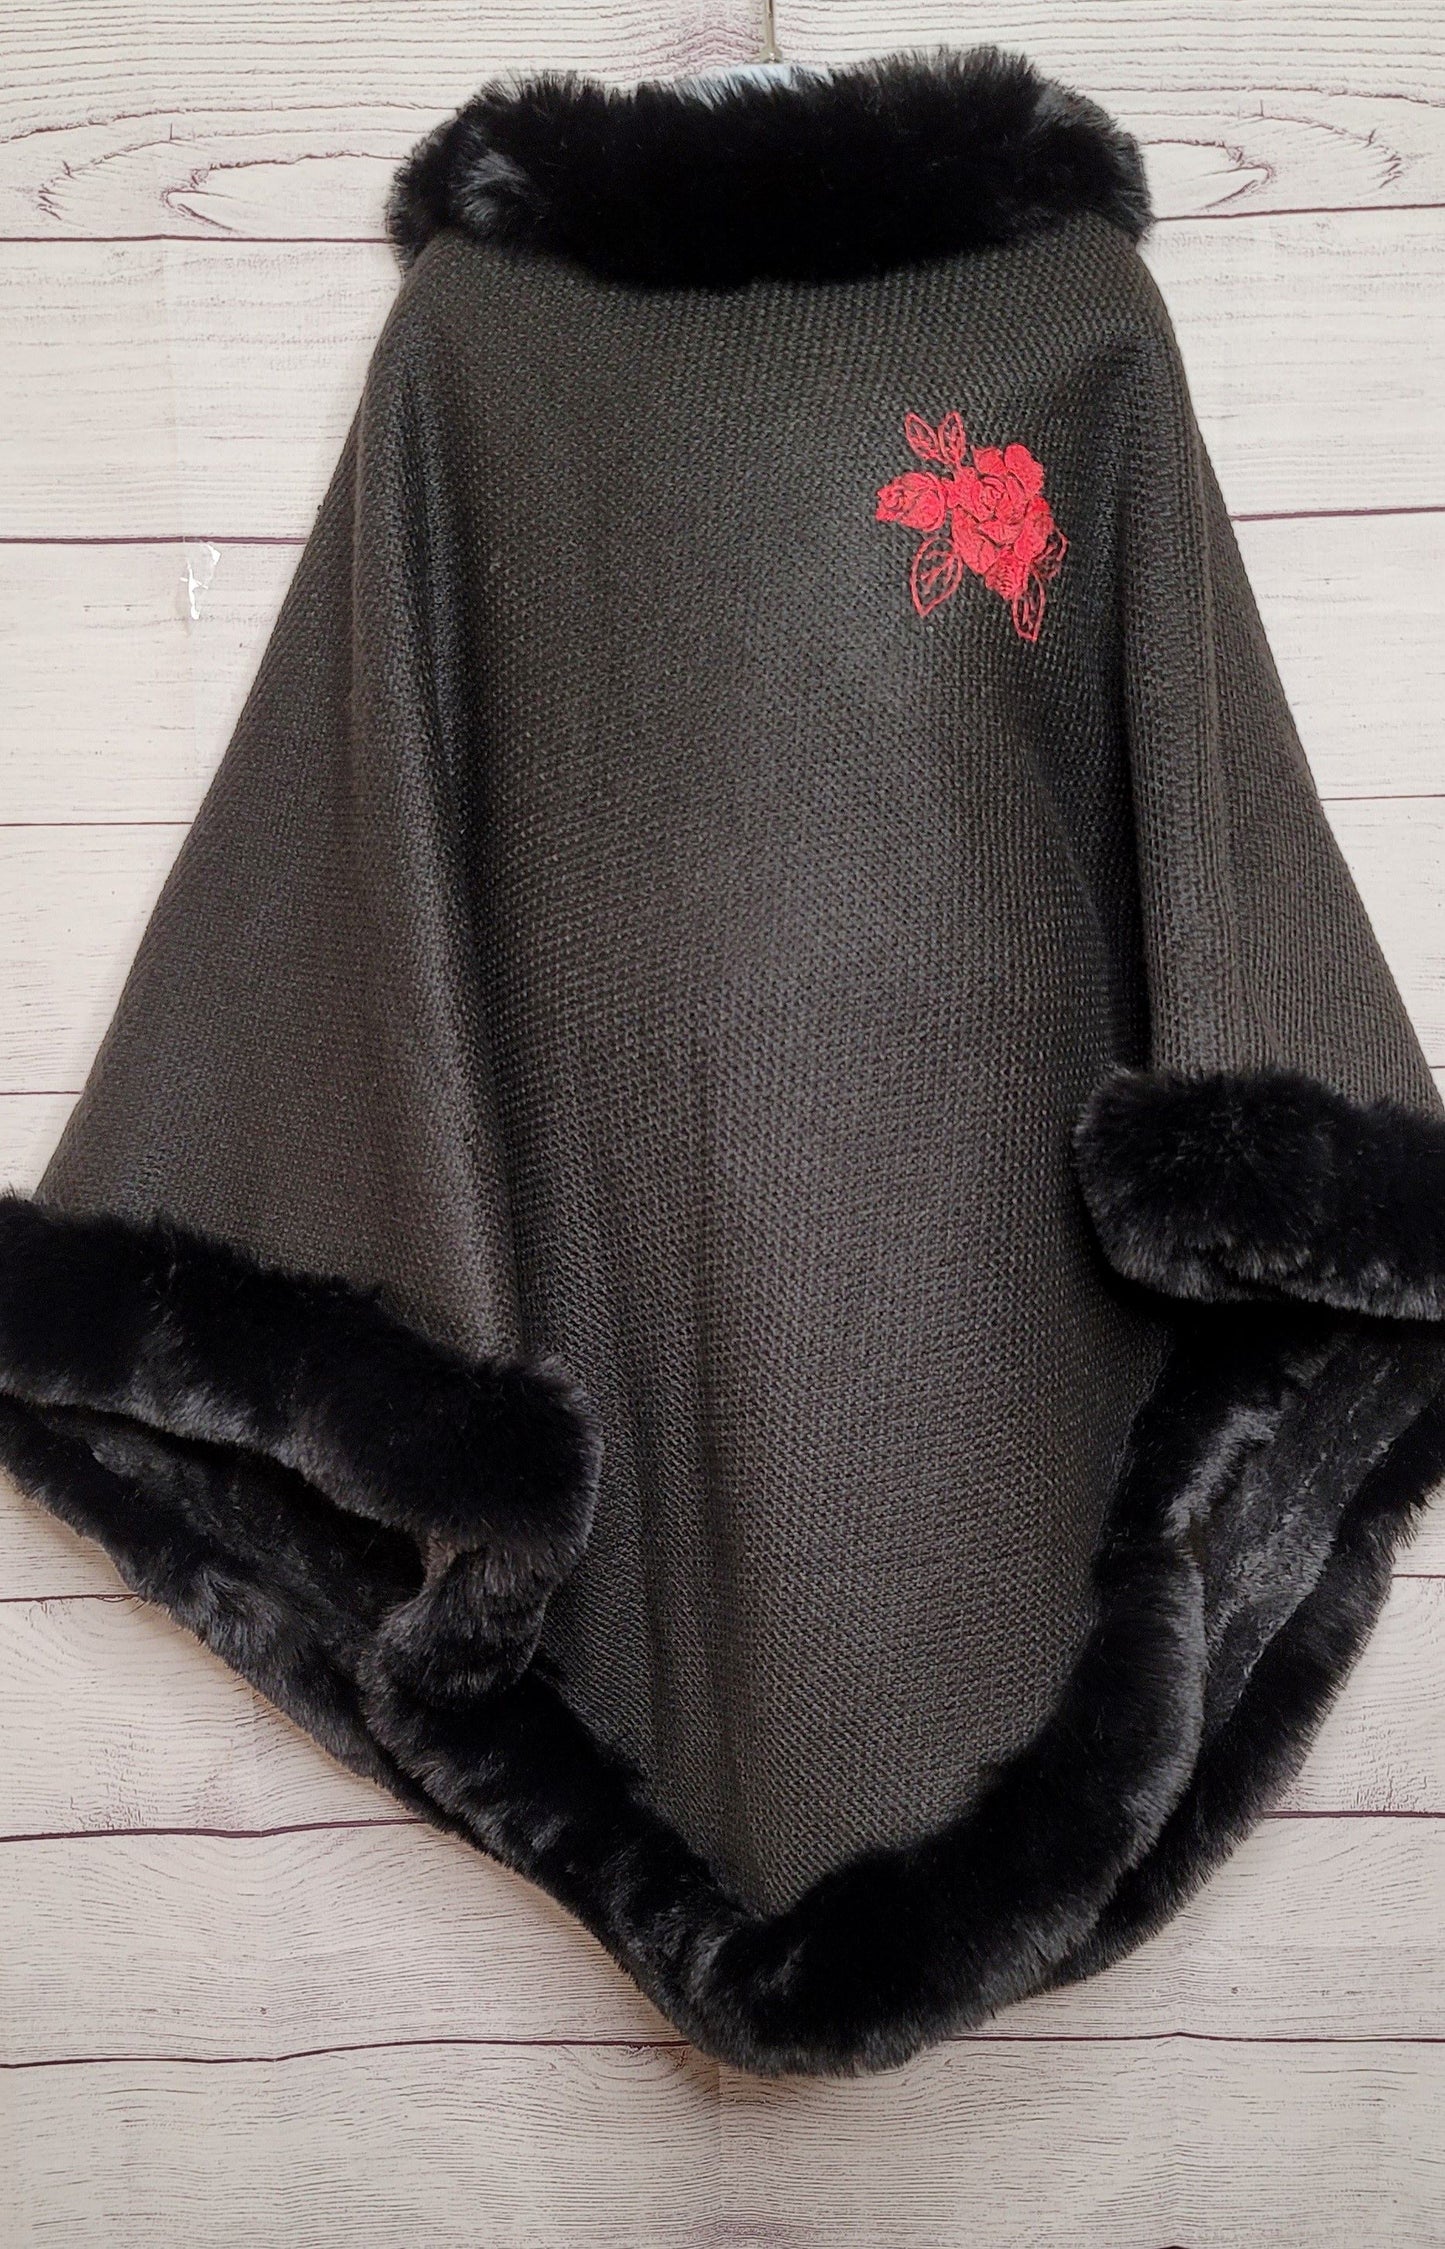 Rose Embroidery Fur Poncho| Women's Embroidery Ponchos